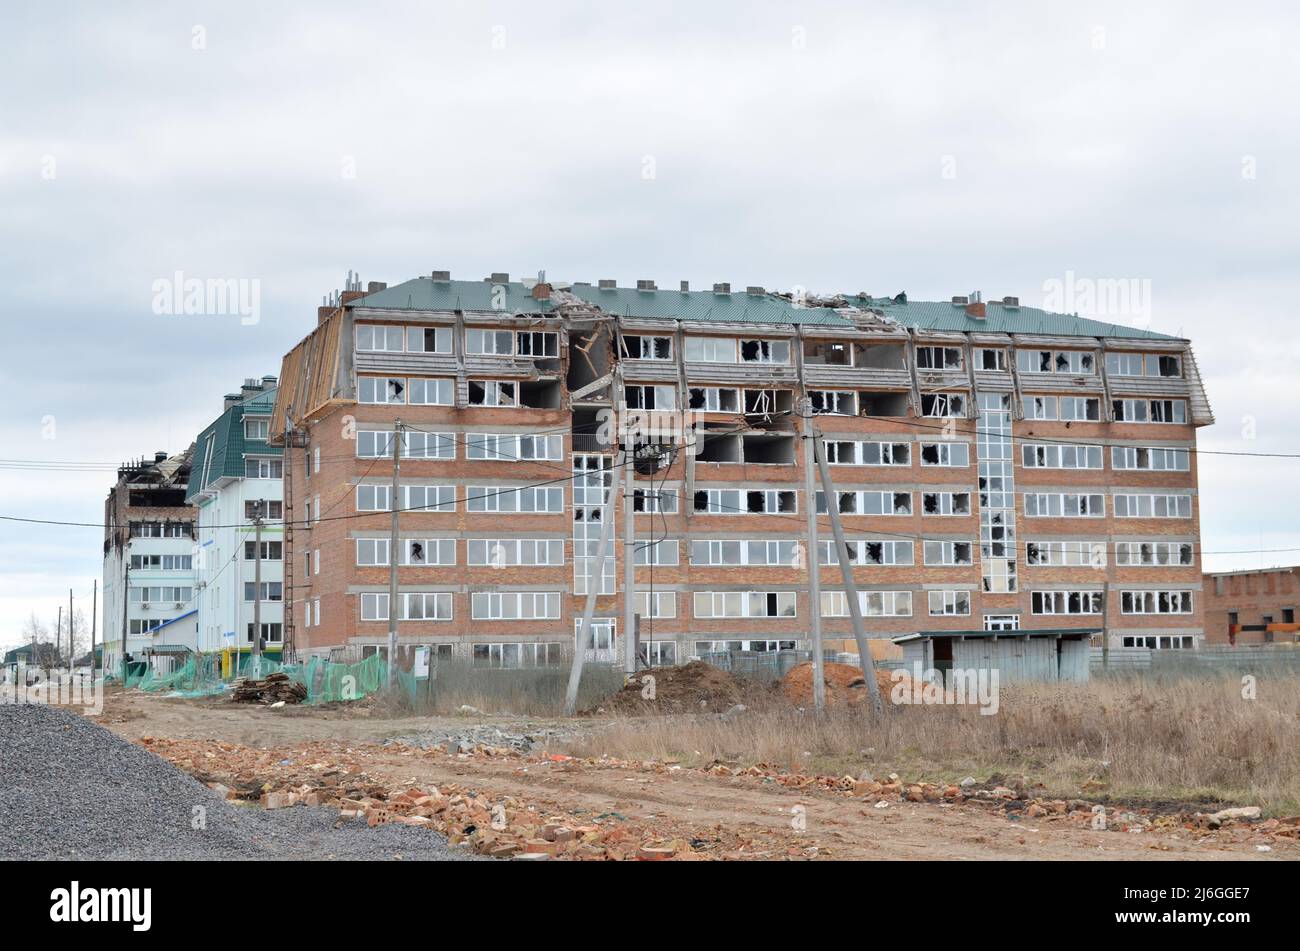 Myla, Kyiv region, Ukraine - Apr 06, 2022: Apartment building in Myla village was shot from a Russian tank during the occupation. Stock Photo